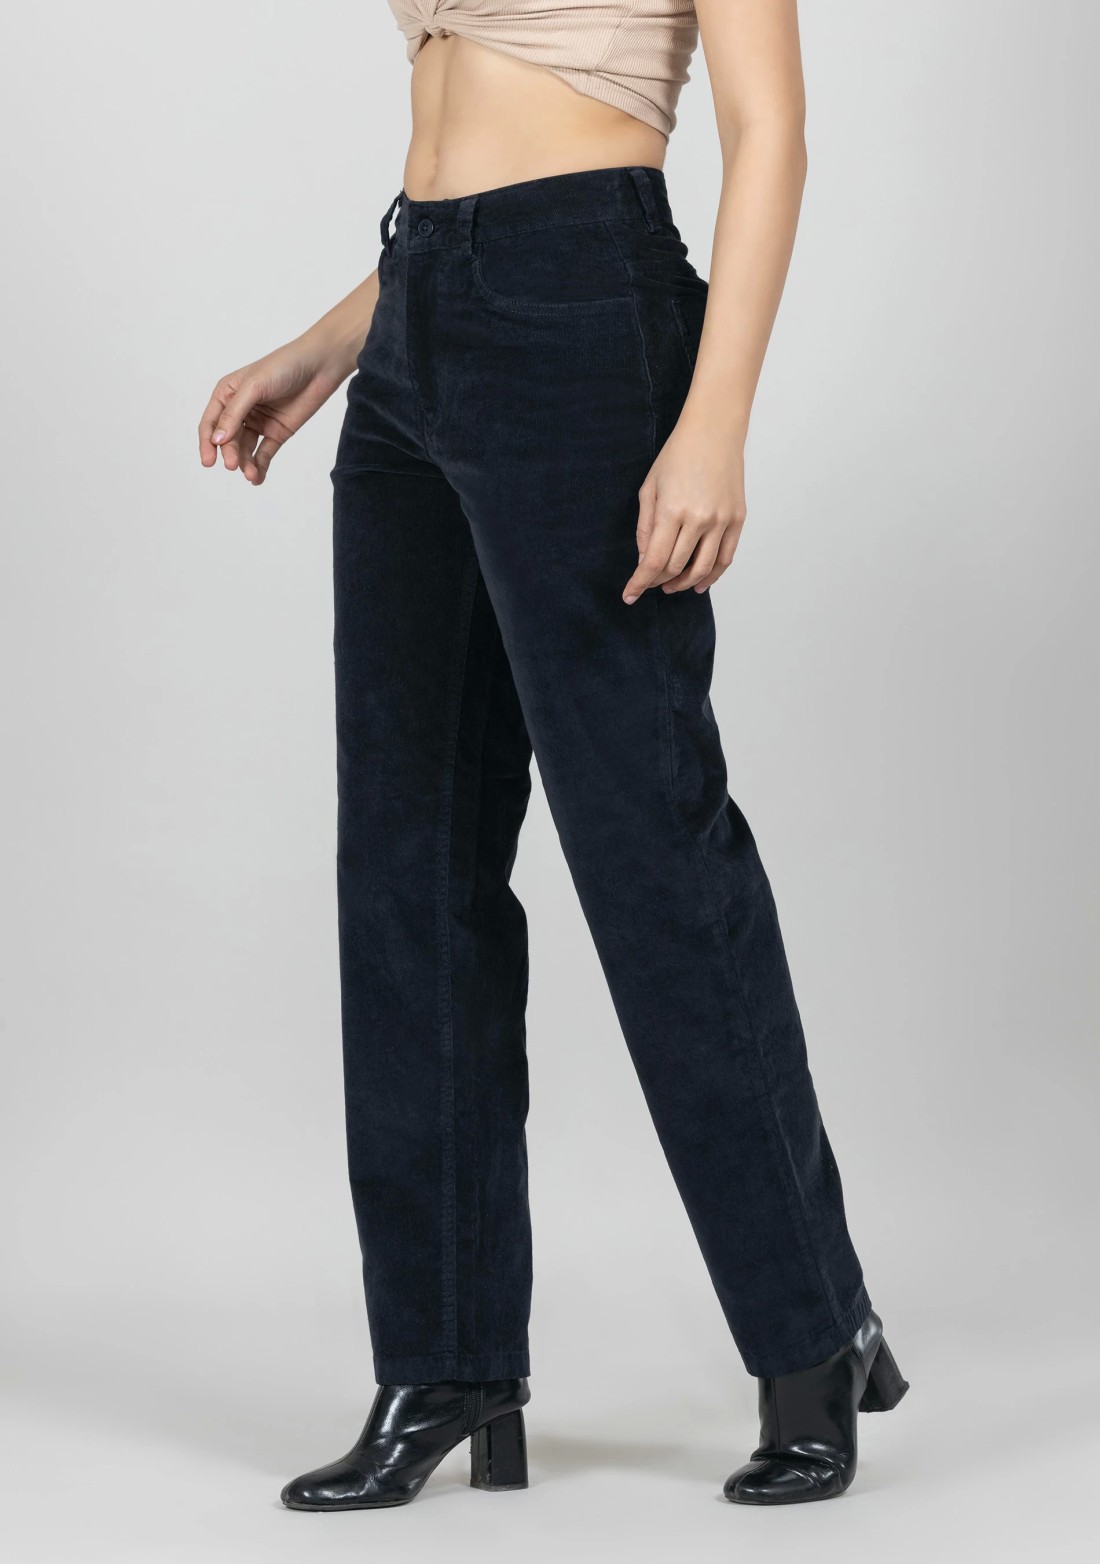 Navy Straight Fit Women’s Casual Corduroy Trousers